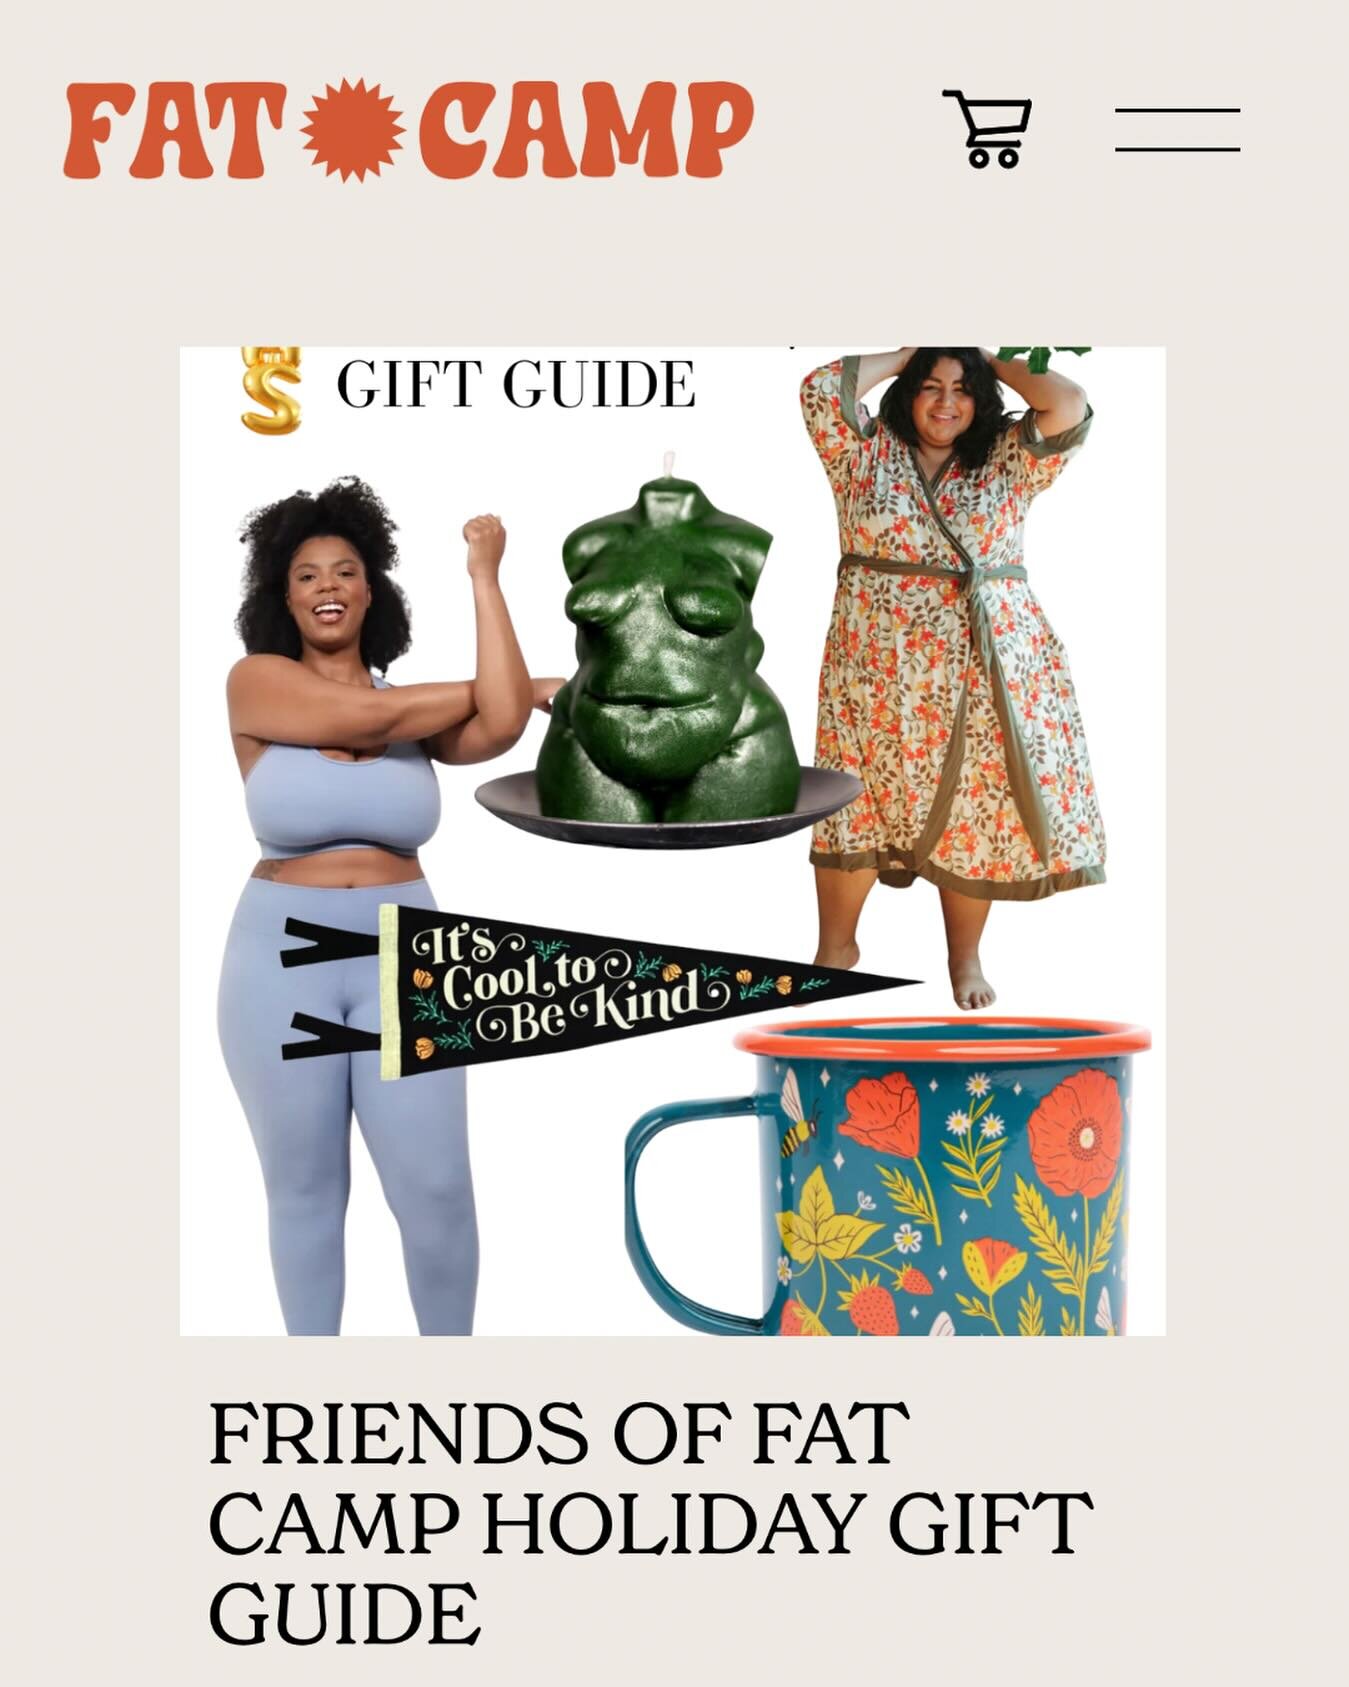 New on the Fat Camp Blog! We curated a list of incredible holiday gift ideas featuring products from some our favorite Friends of Fat Camp! ✨

Click the link in our bio or visit www.fatcampretreat.com/blog!